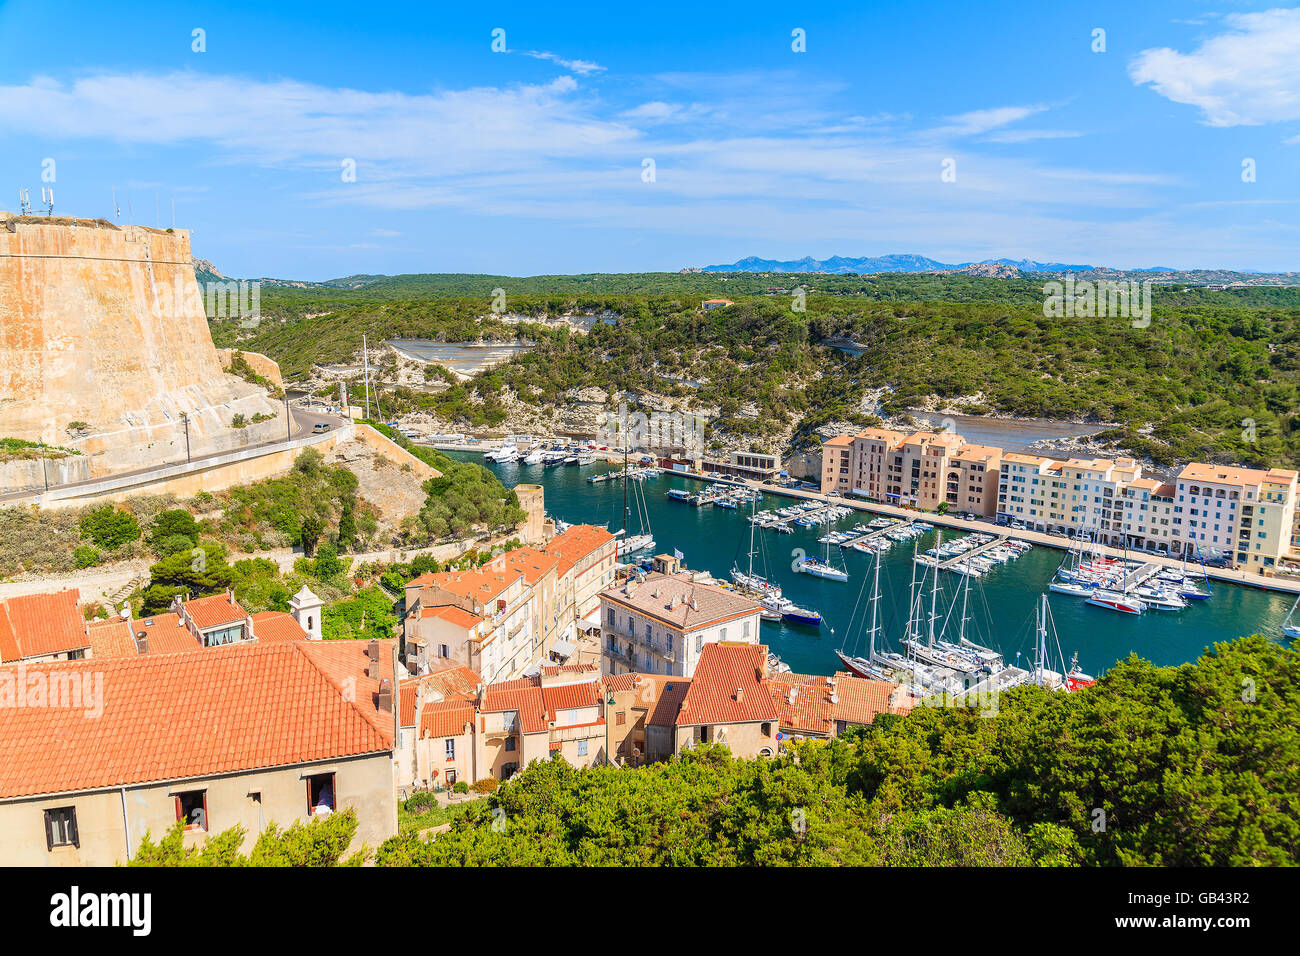 A view of Bonifacio port with colorful houses and boats, Corsica island, France. Stock Photo